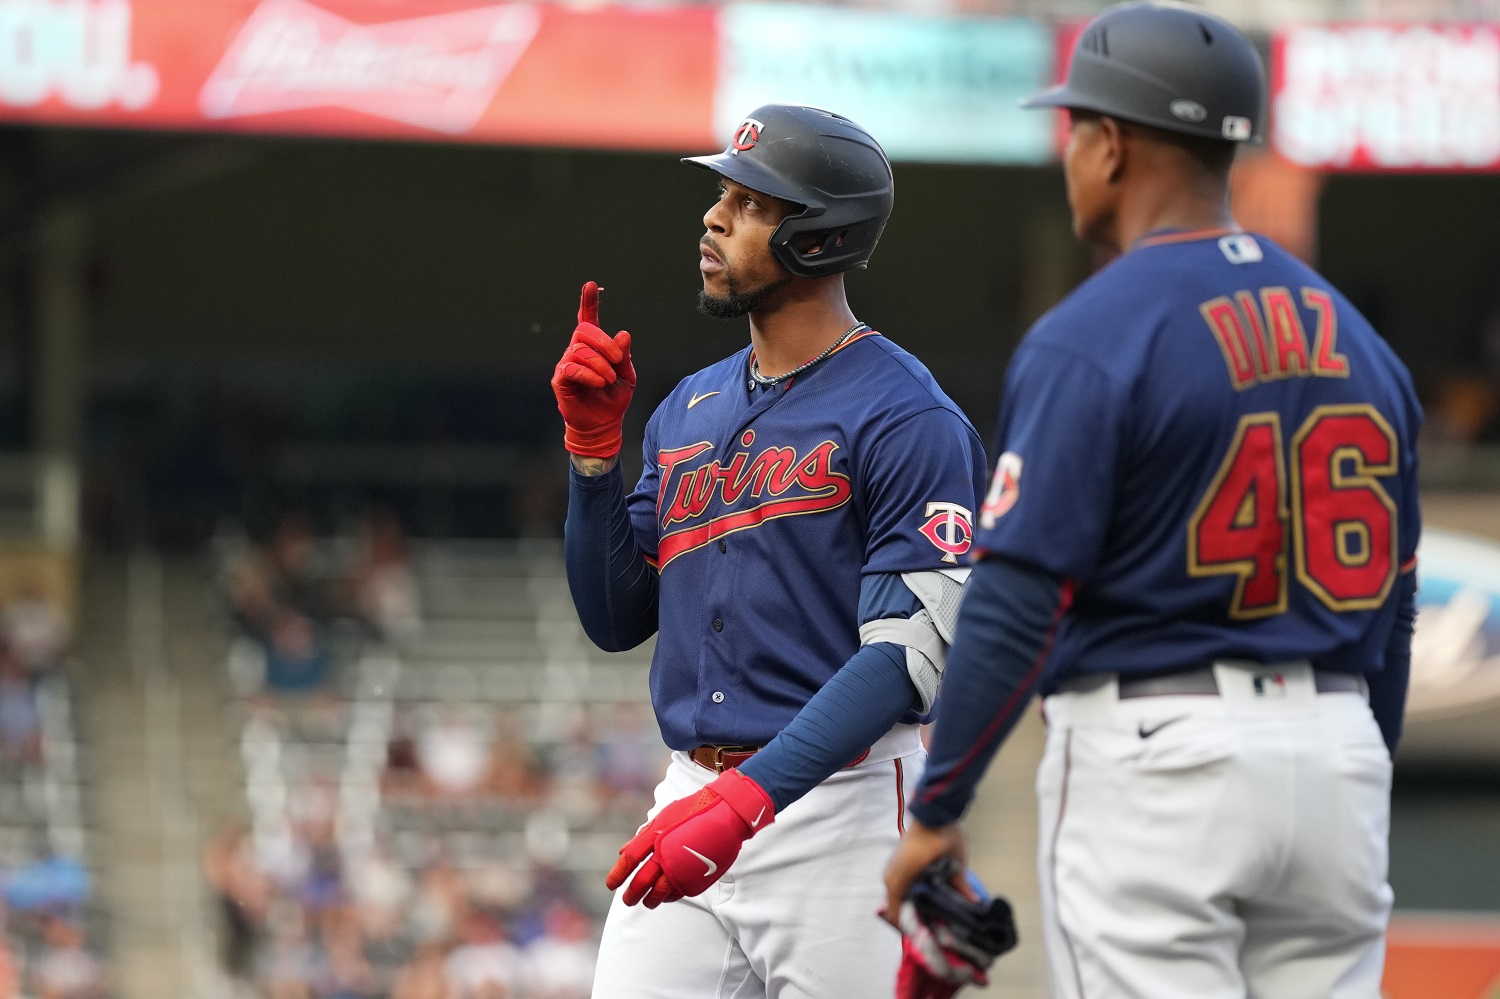 As the Twins' DH, Byron Buxton on pace to play career high in